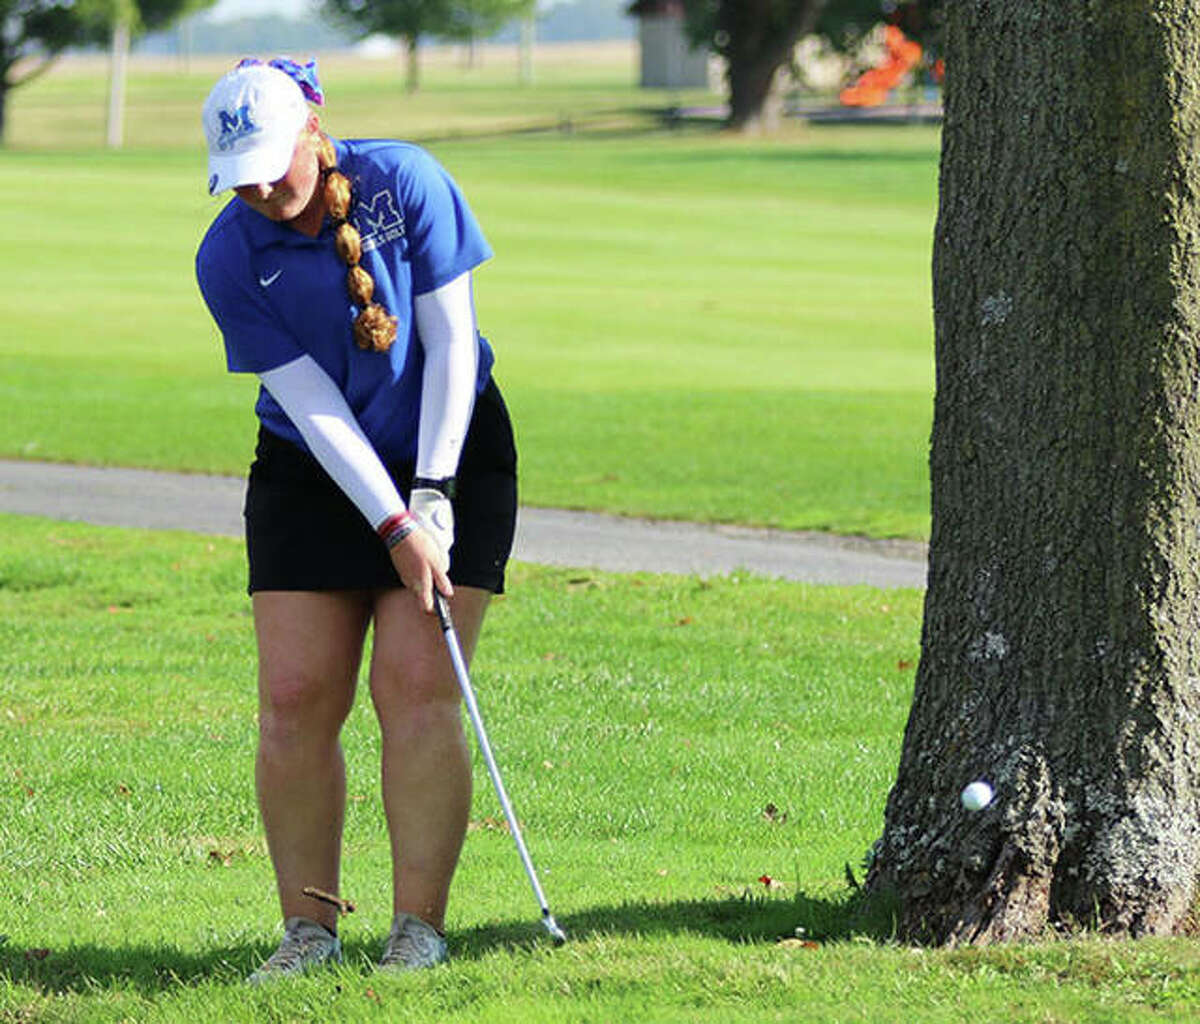 Marquette’s Gracie Piar hits back on the fairway on the first hole Thursday in the regional at Belk Park in Wood River. Piar bogeyed the hole, but came back to shoot 7-under par 65 to win the tournament.